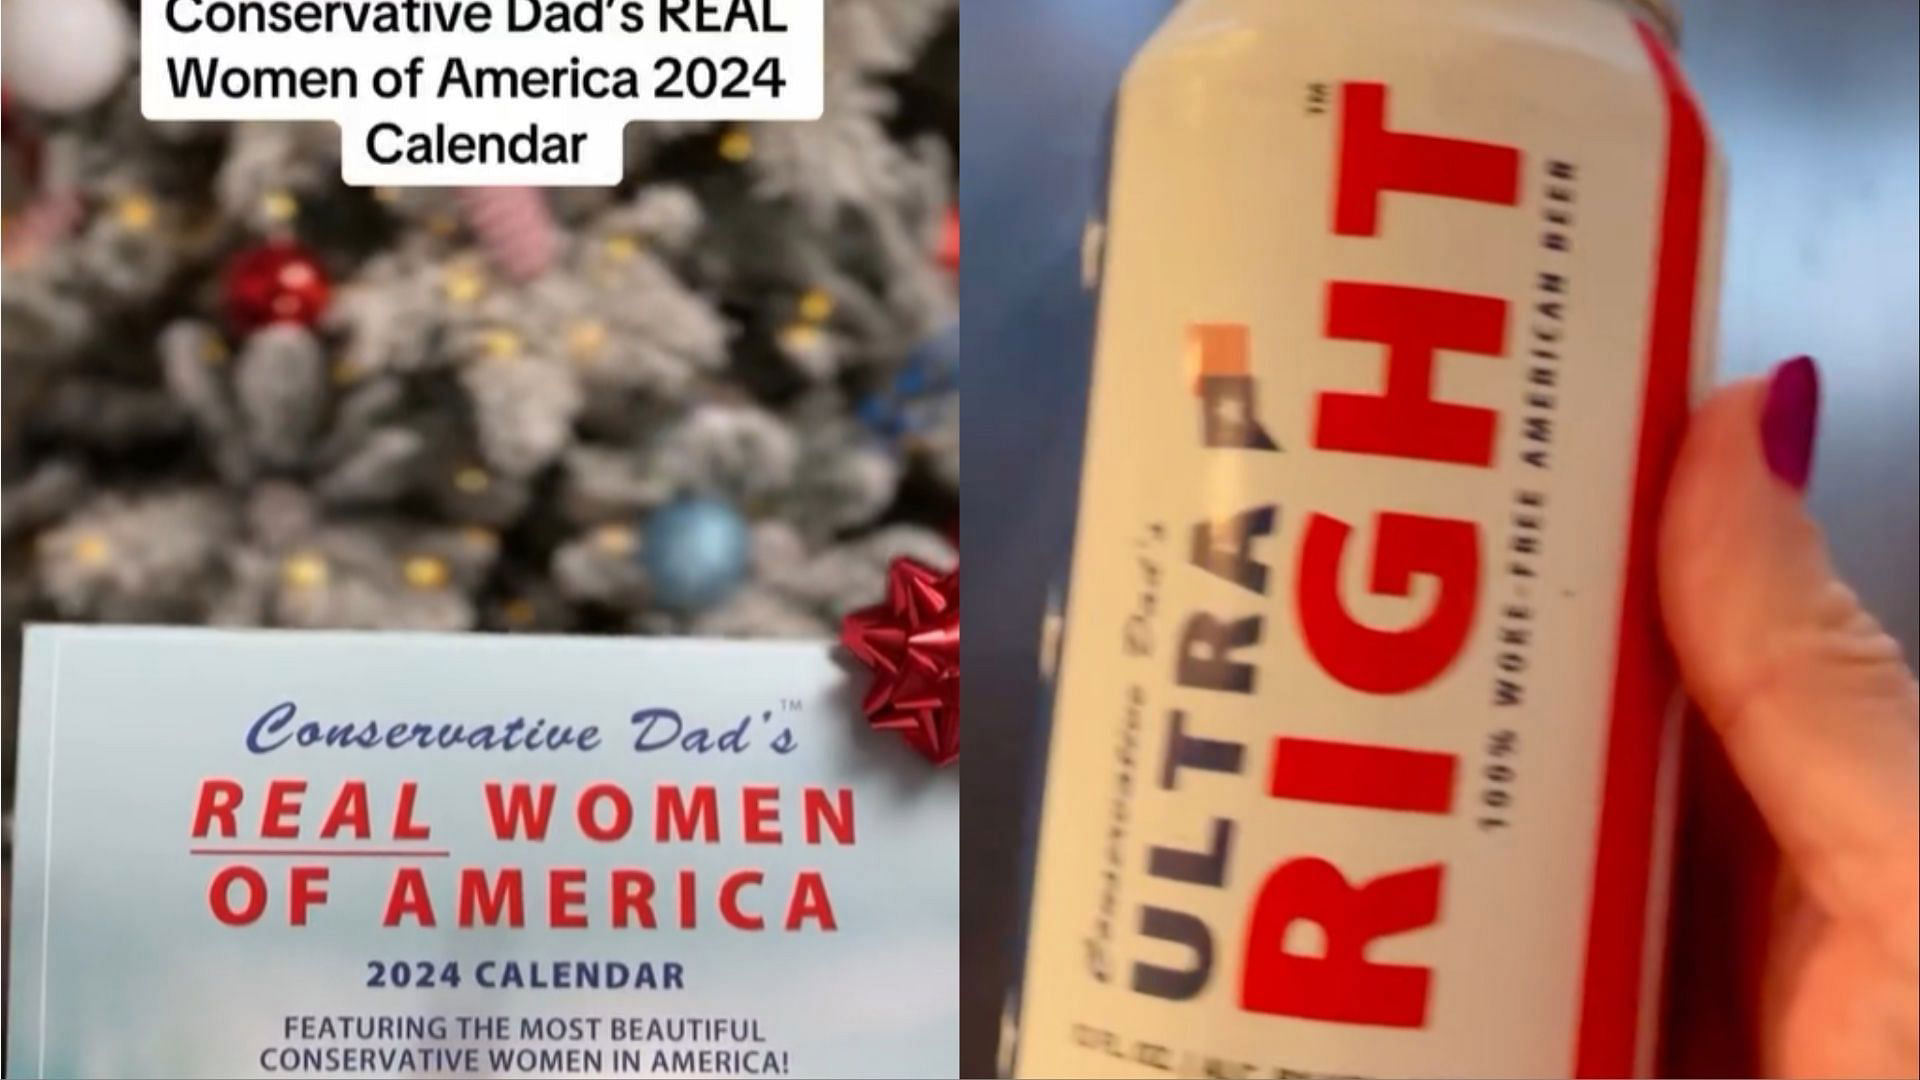 conservative-dad-beer-calendar-where-to-buy-price-models-and-all-you